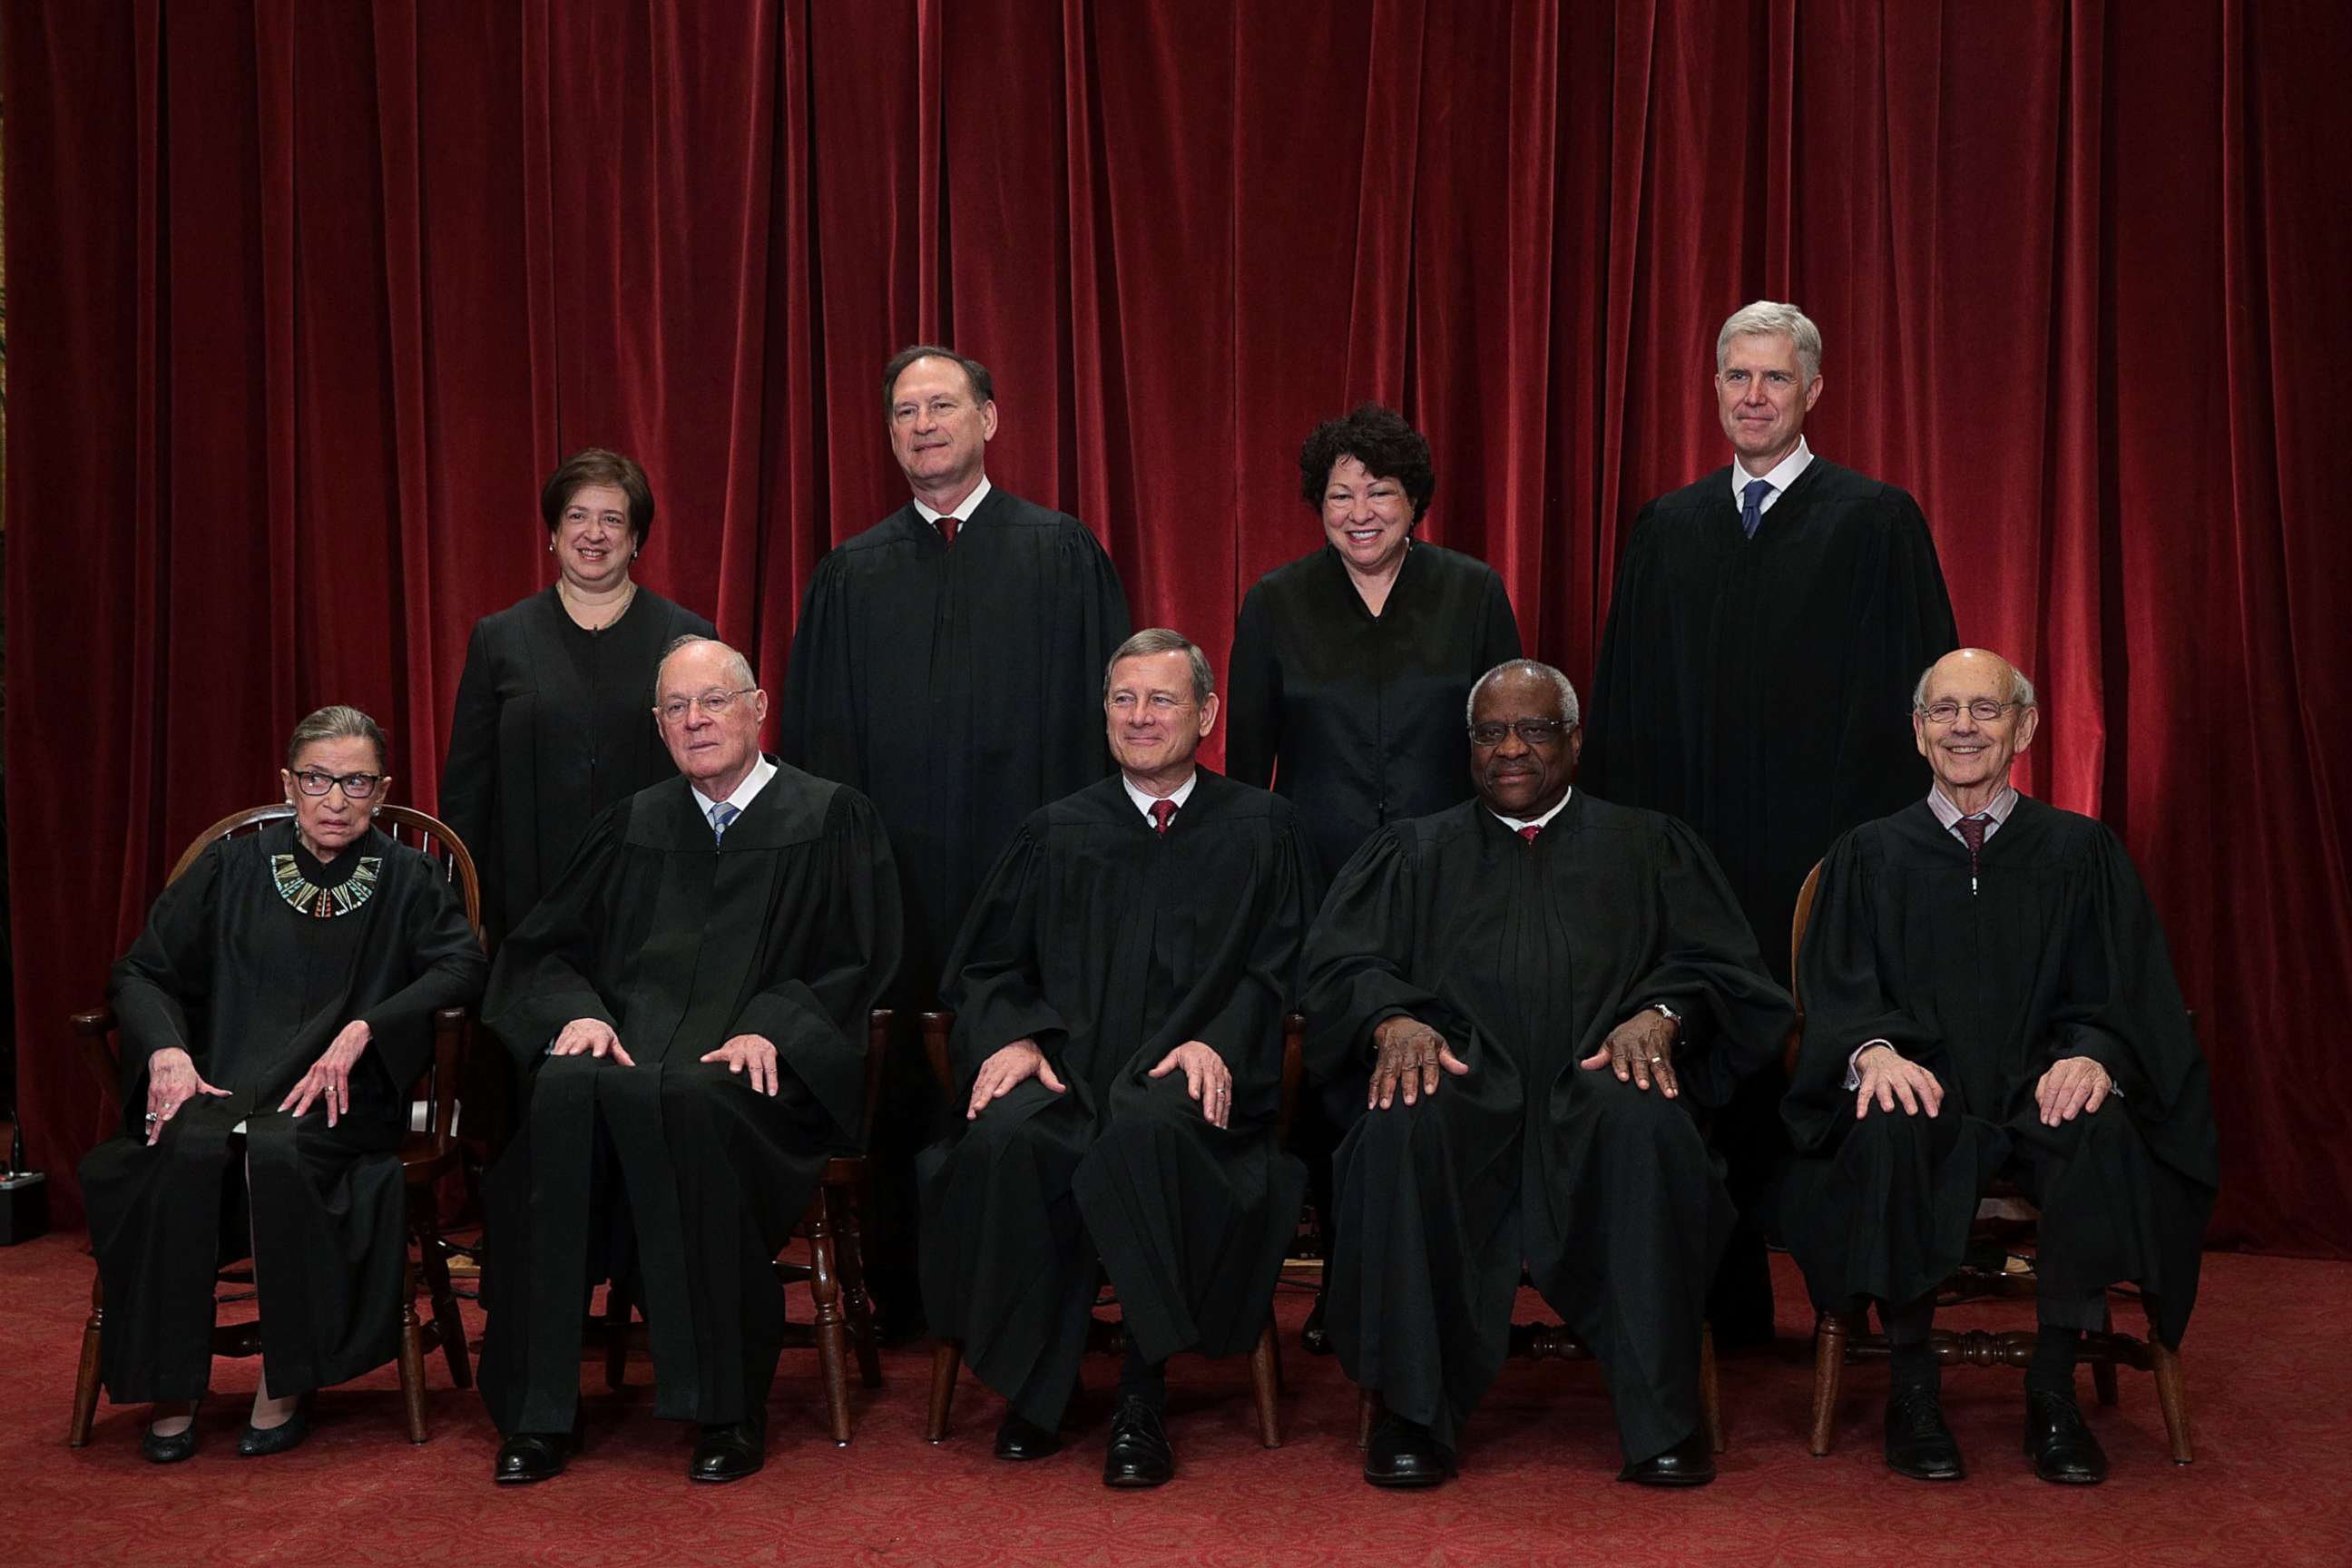 PHOTO: The justices of the U.S. Supreme Court gather for an official group portrait to include new Associate Justice Neil Gorsuch, top row, far right, June 1, 2017, at the Supreme Court Building in Washington, D.C.